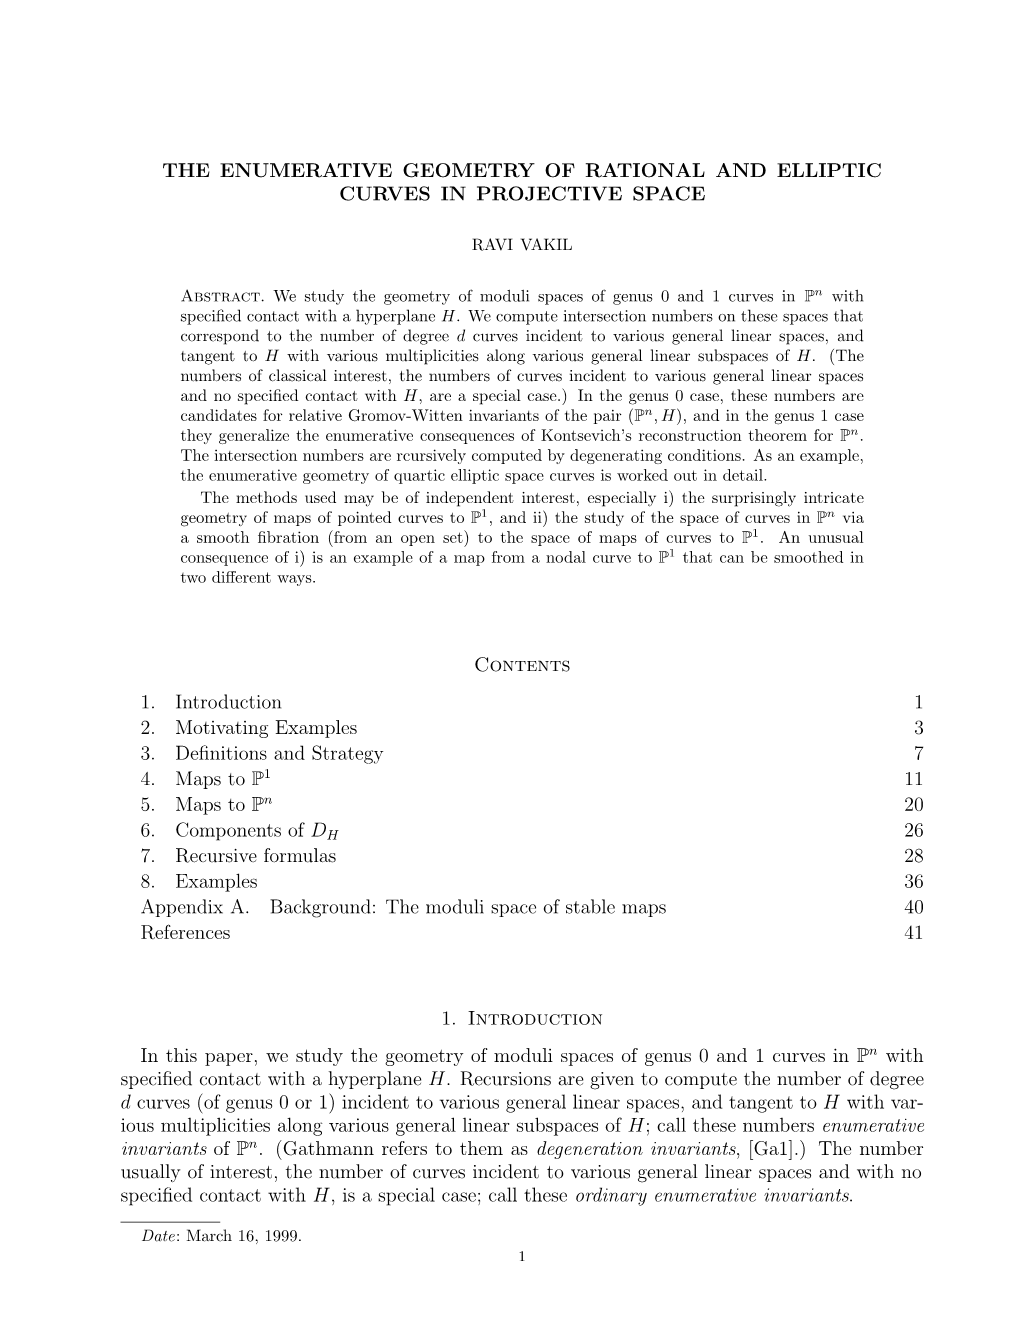 The Enumerative Geometry of Rational and Elliptic Curves in Projective Space